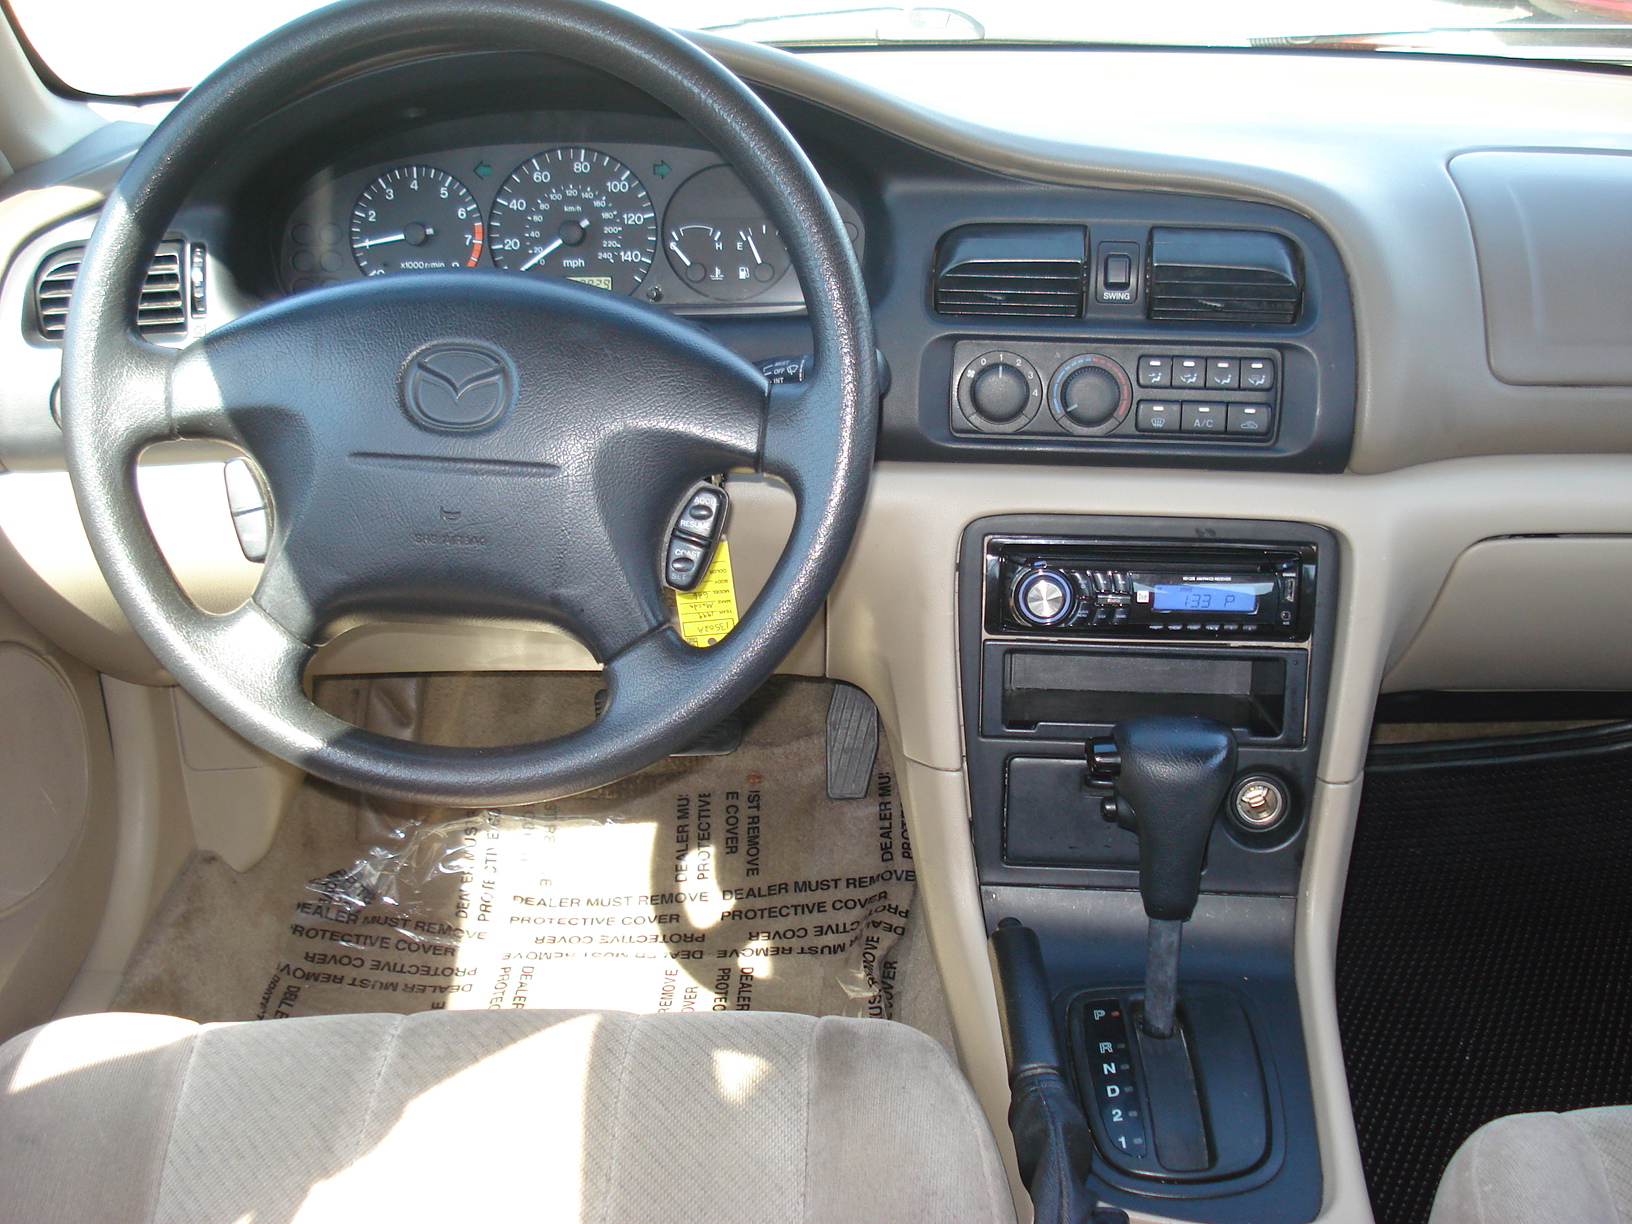 1999 Mazda 626 - Information and photos - Neo Drive